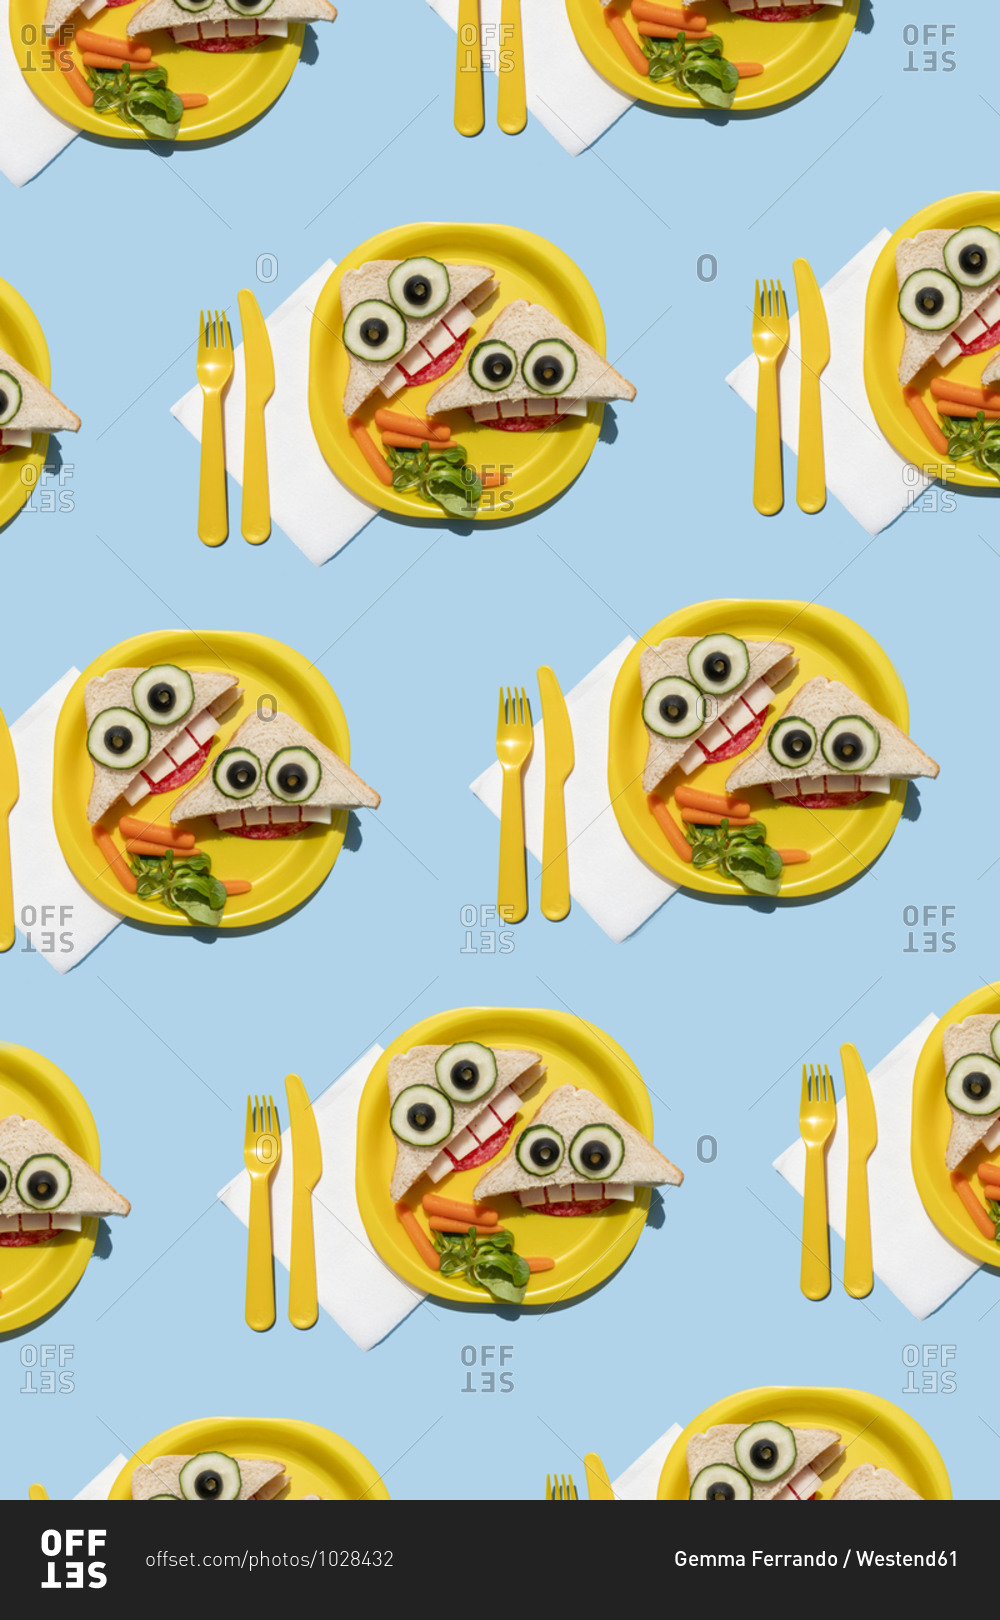 Pattern of plastic plates with funny looking sandwiches with anthropomorphic faces